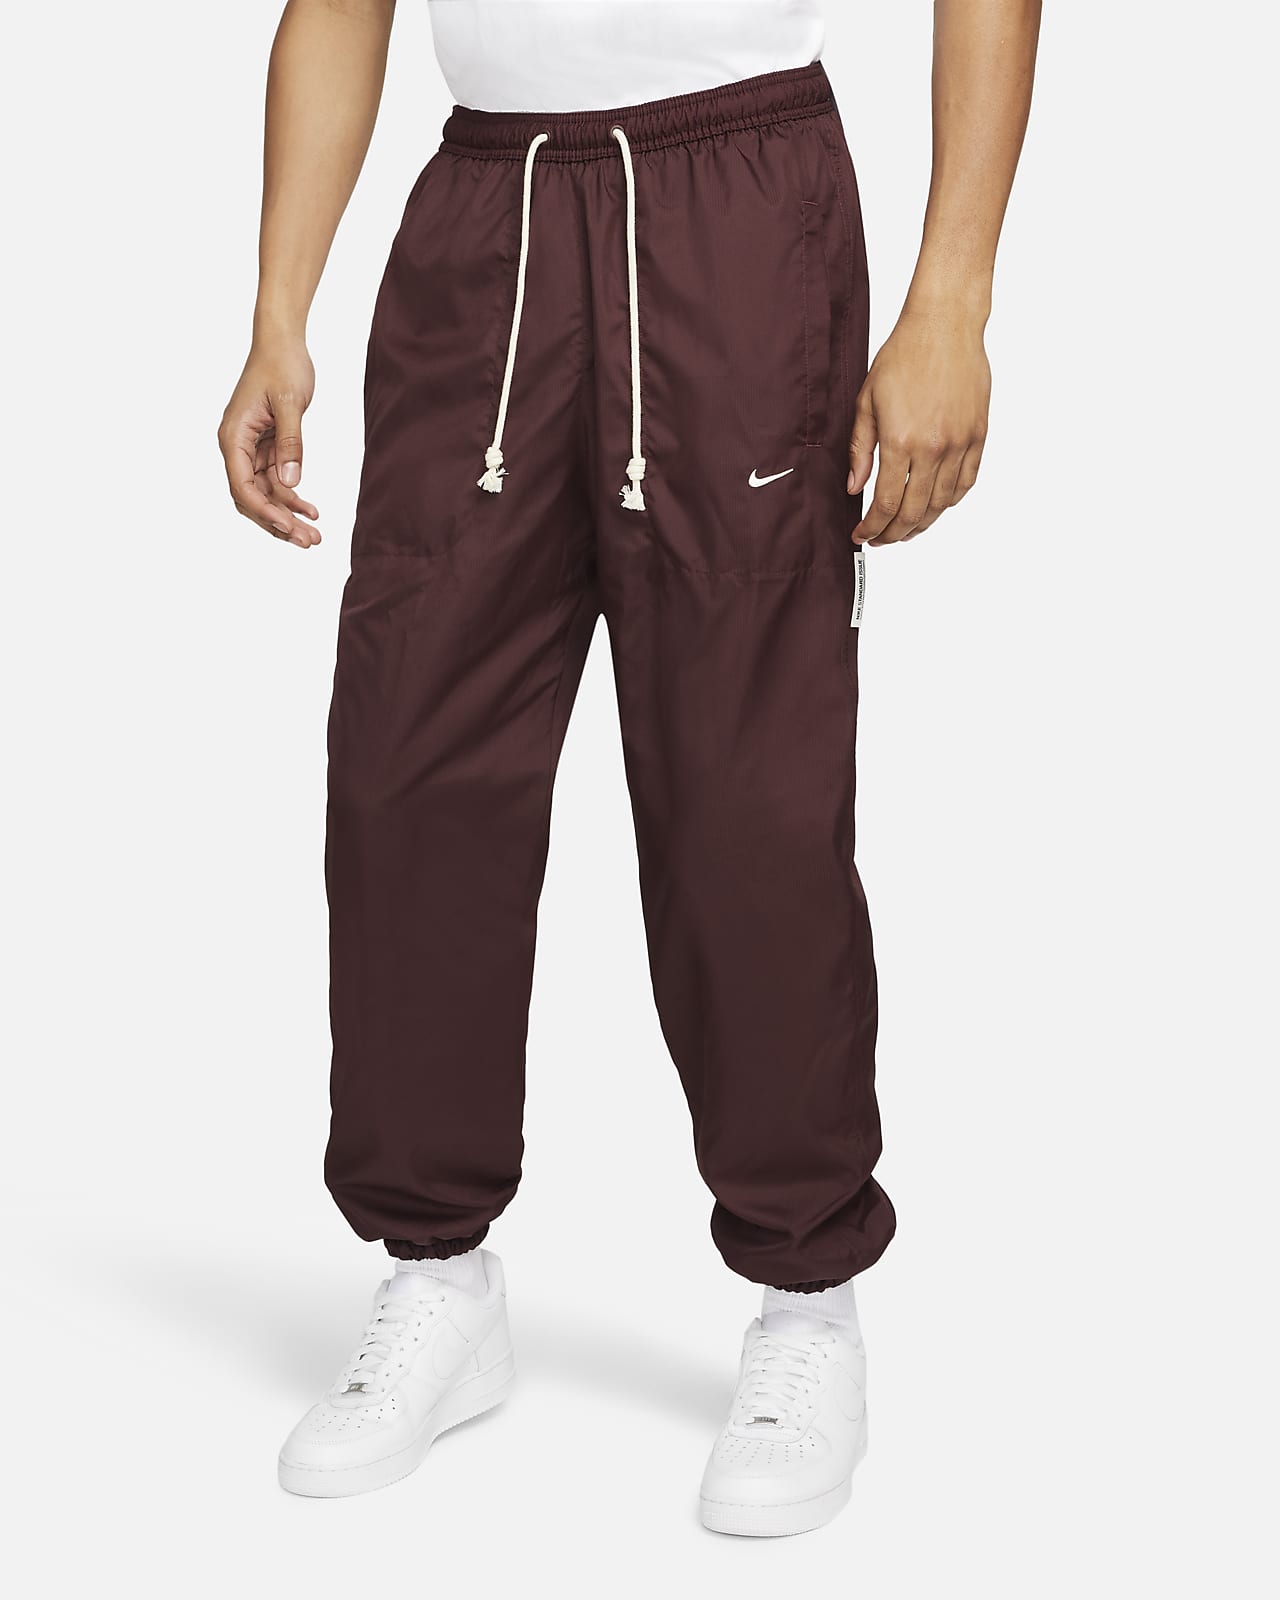 Nike Therma-FIT Standard Issue Men's Basketball Winterized Pants